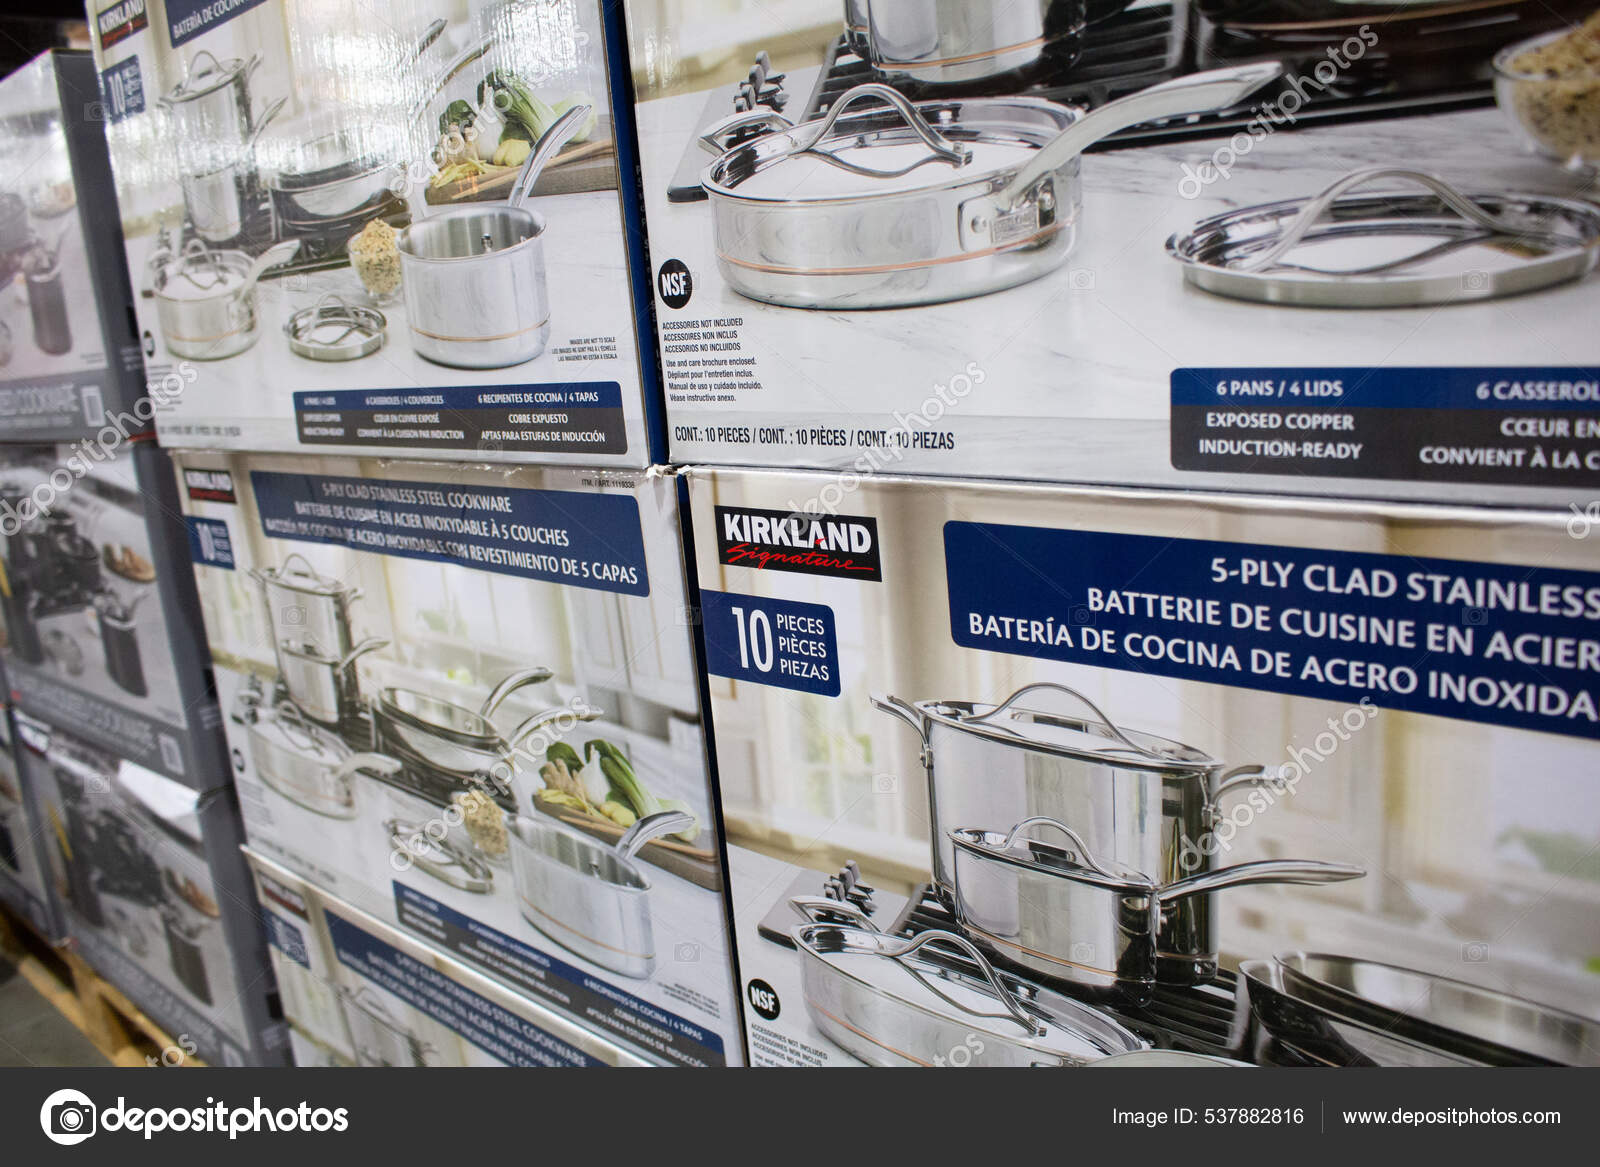 Costco Kirkland Stainless Steel Cookware Review (New Set